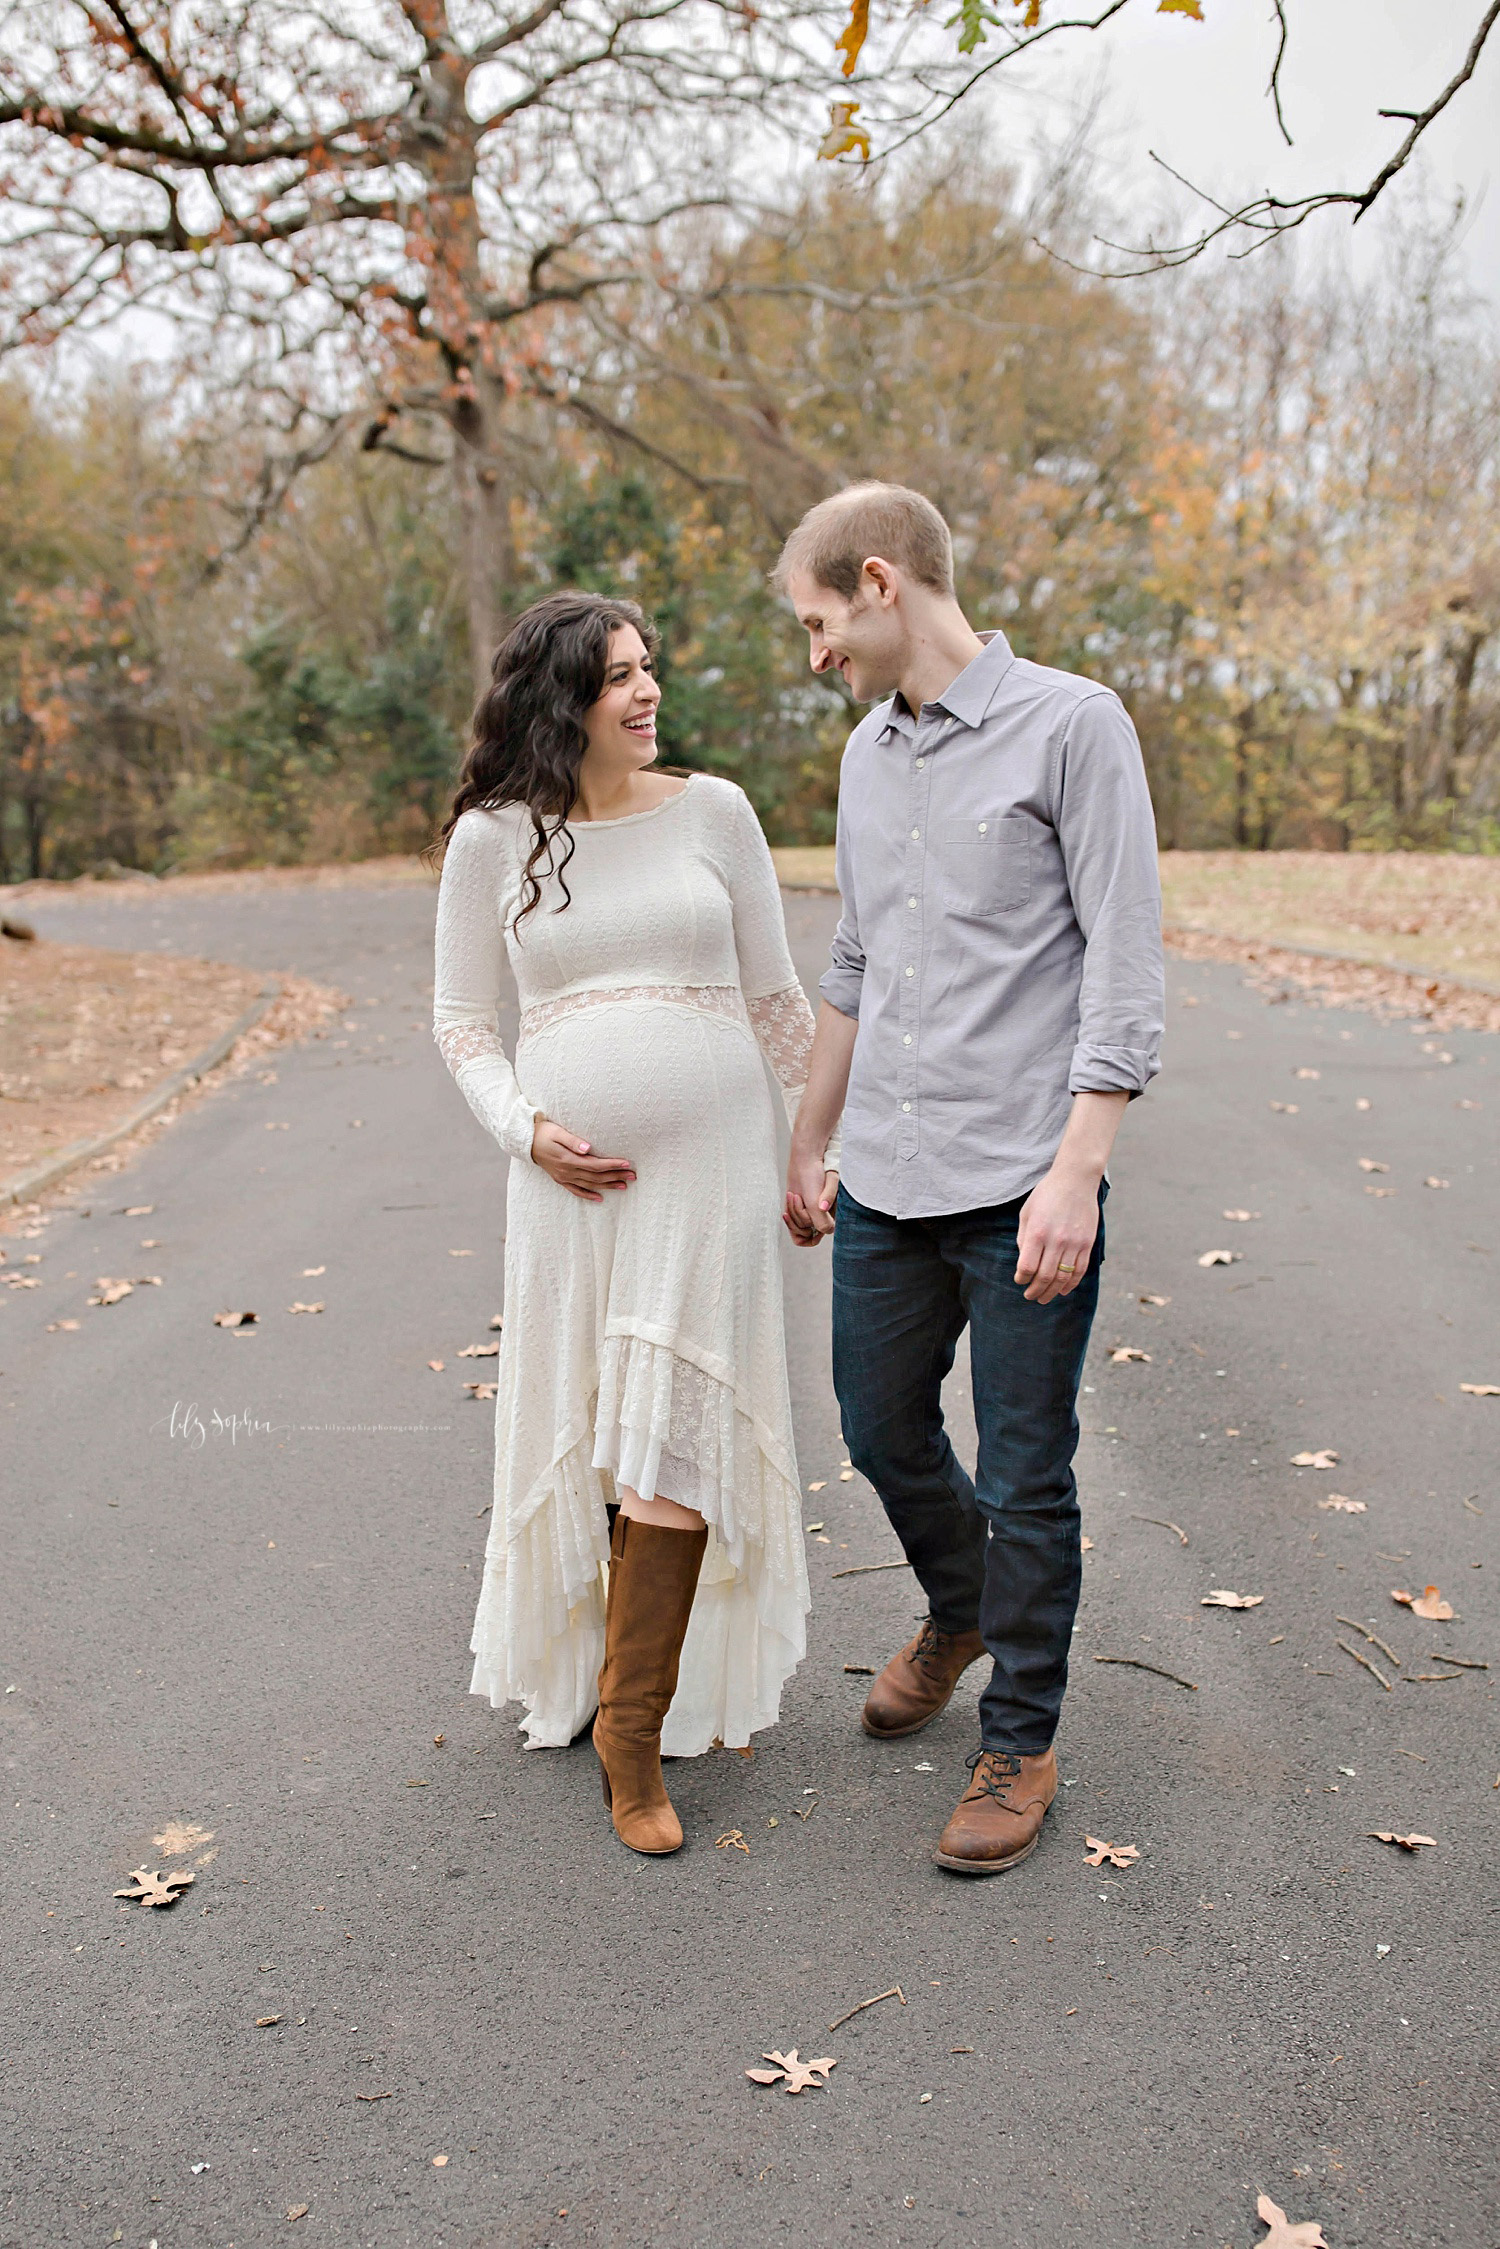 Pregnant woman wearing white dress and boots holding husbands hand while walking in local Atlanta park